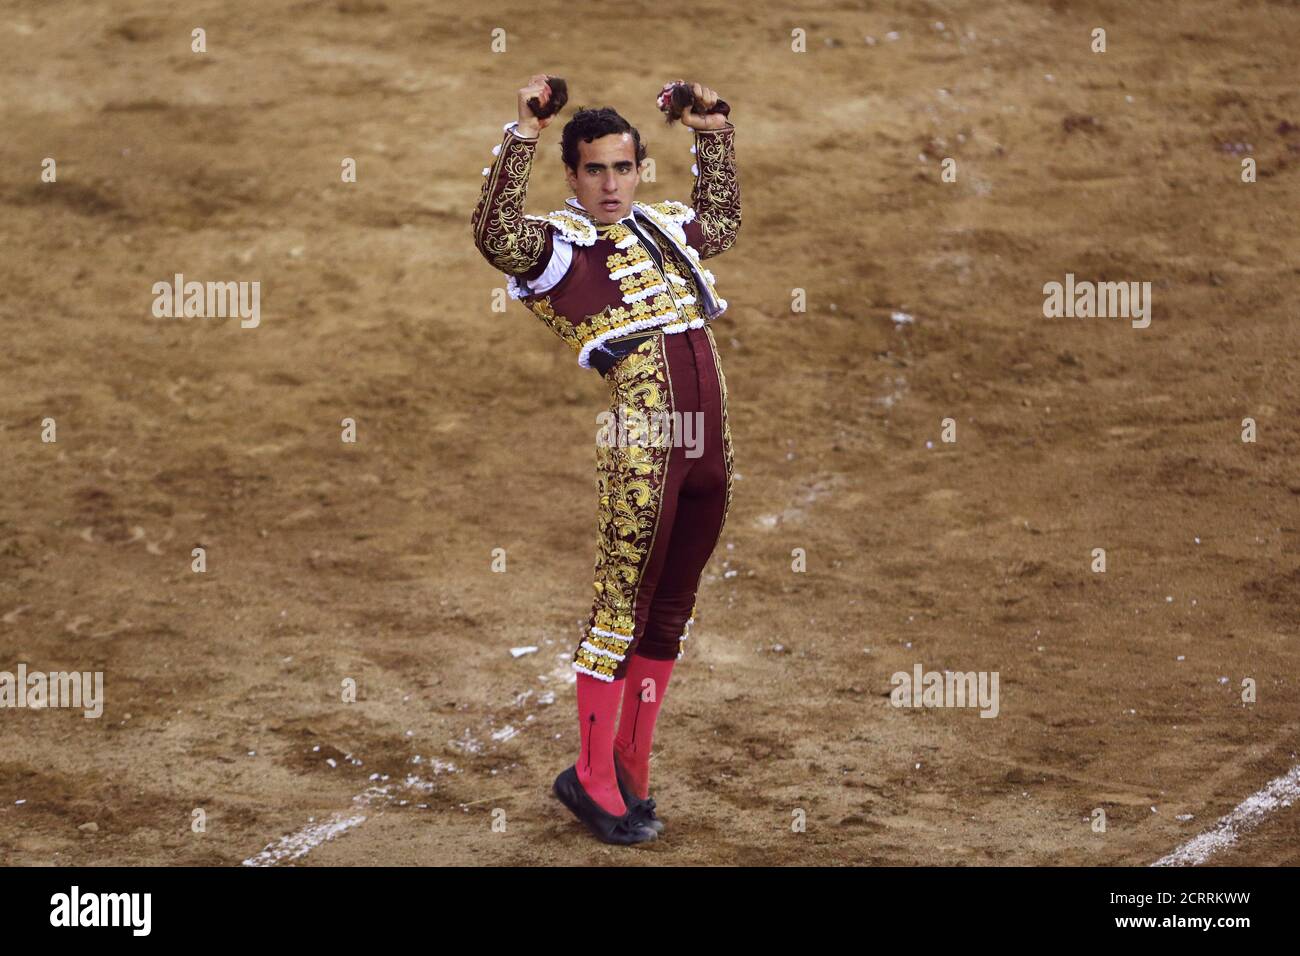 Peruvian bullfighter Joaquin Galdos celebrates with his trophy, two ears of a bull he killed, during a bullfight at Peru's historic Plaza de Acho bullring in Lima, November 5, 2017. REUTERS/Guadalupe Pardo Stock Photo